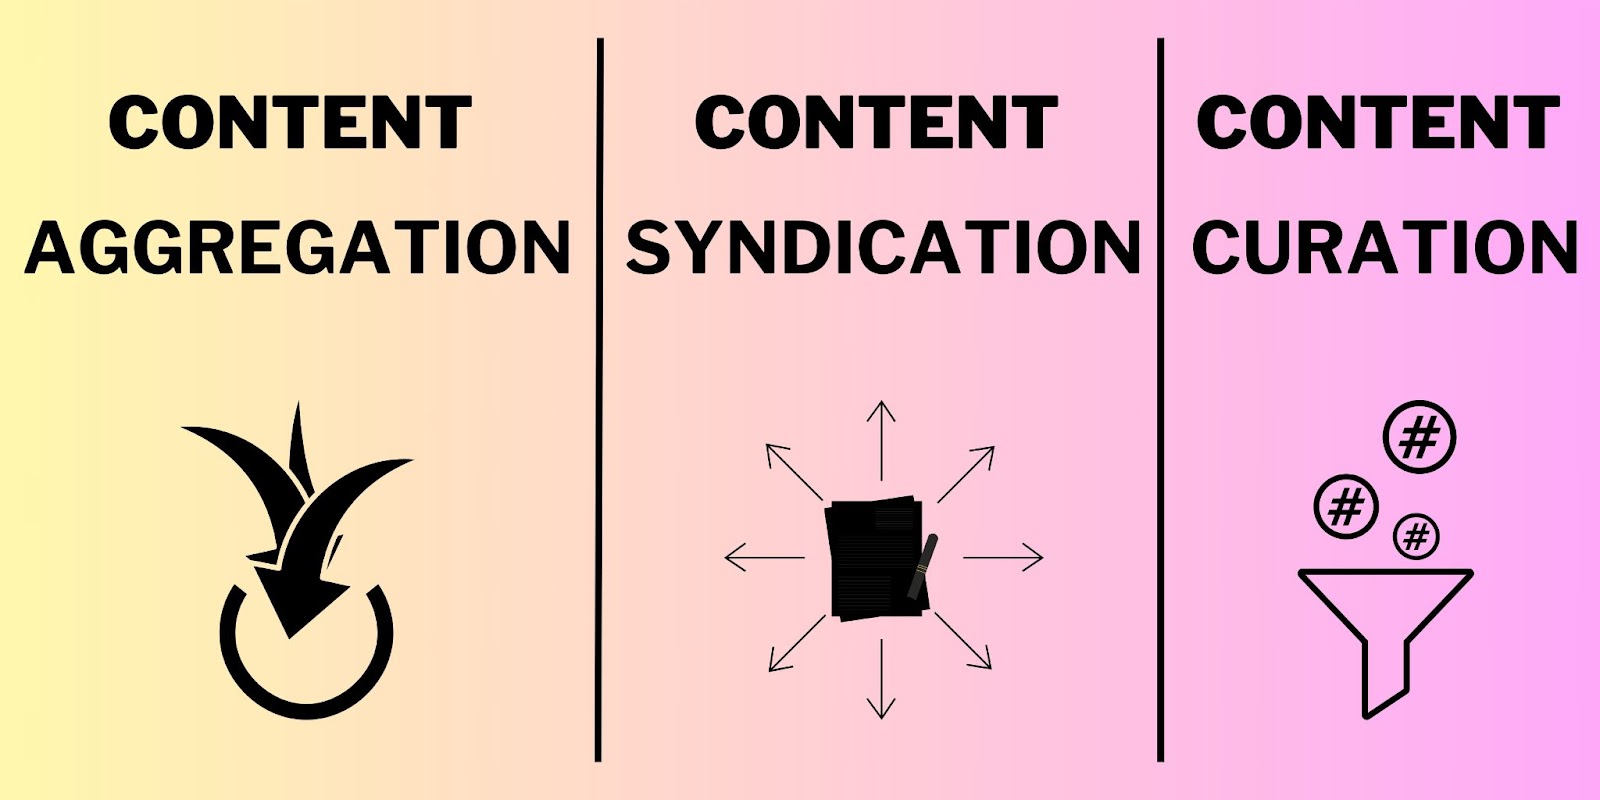 content curation vs aggregation vs syndication